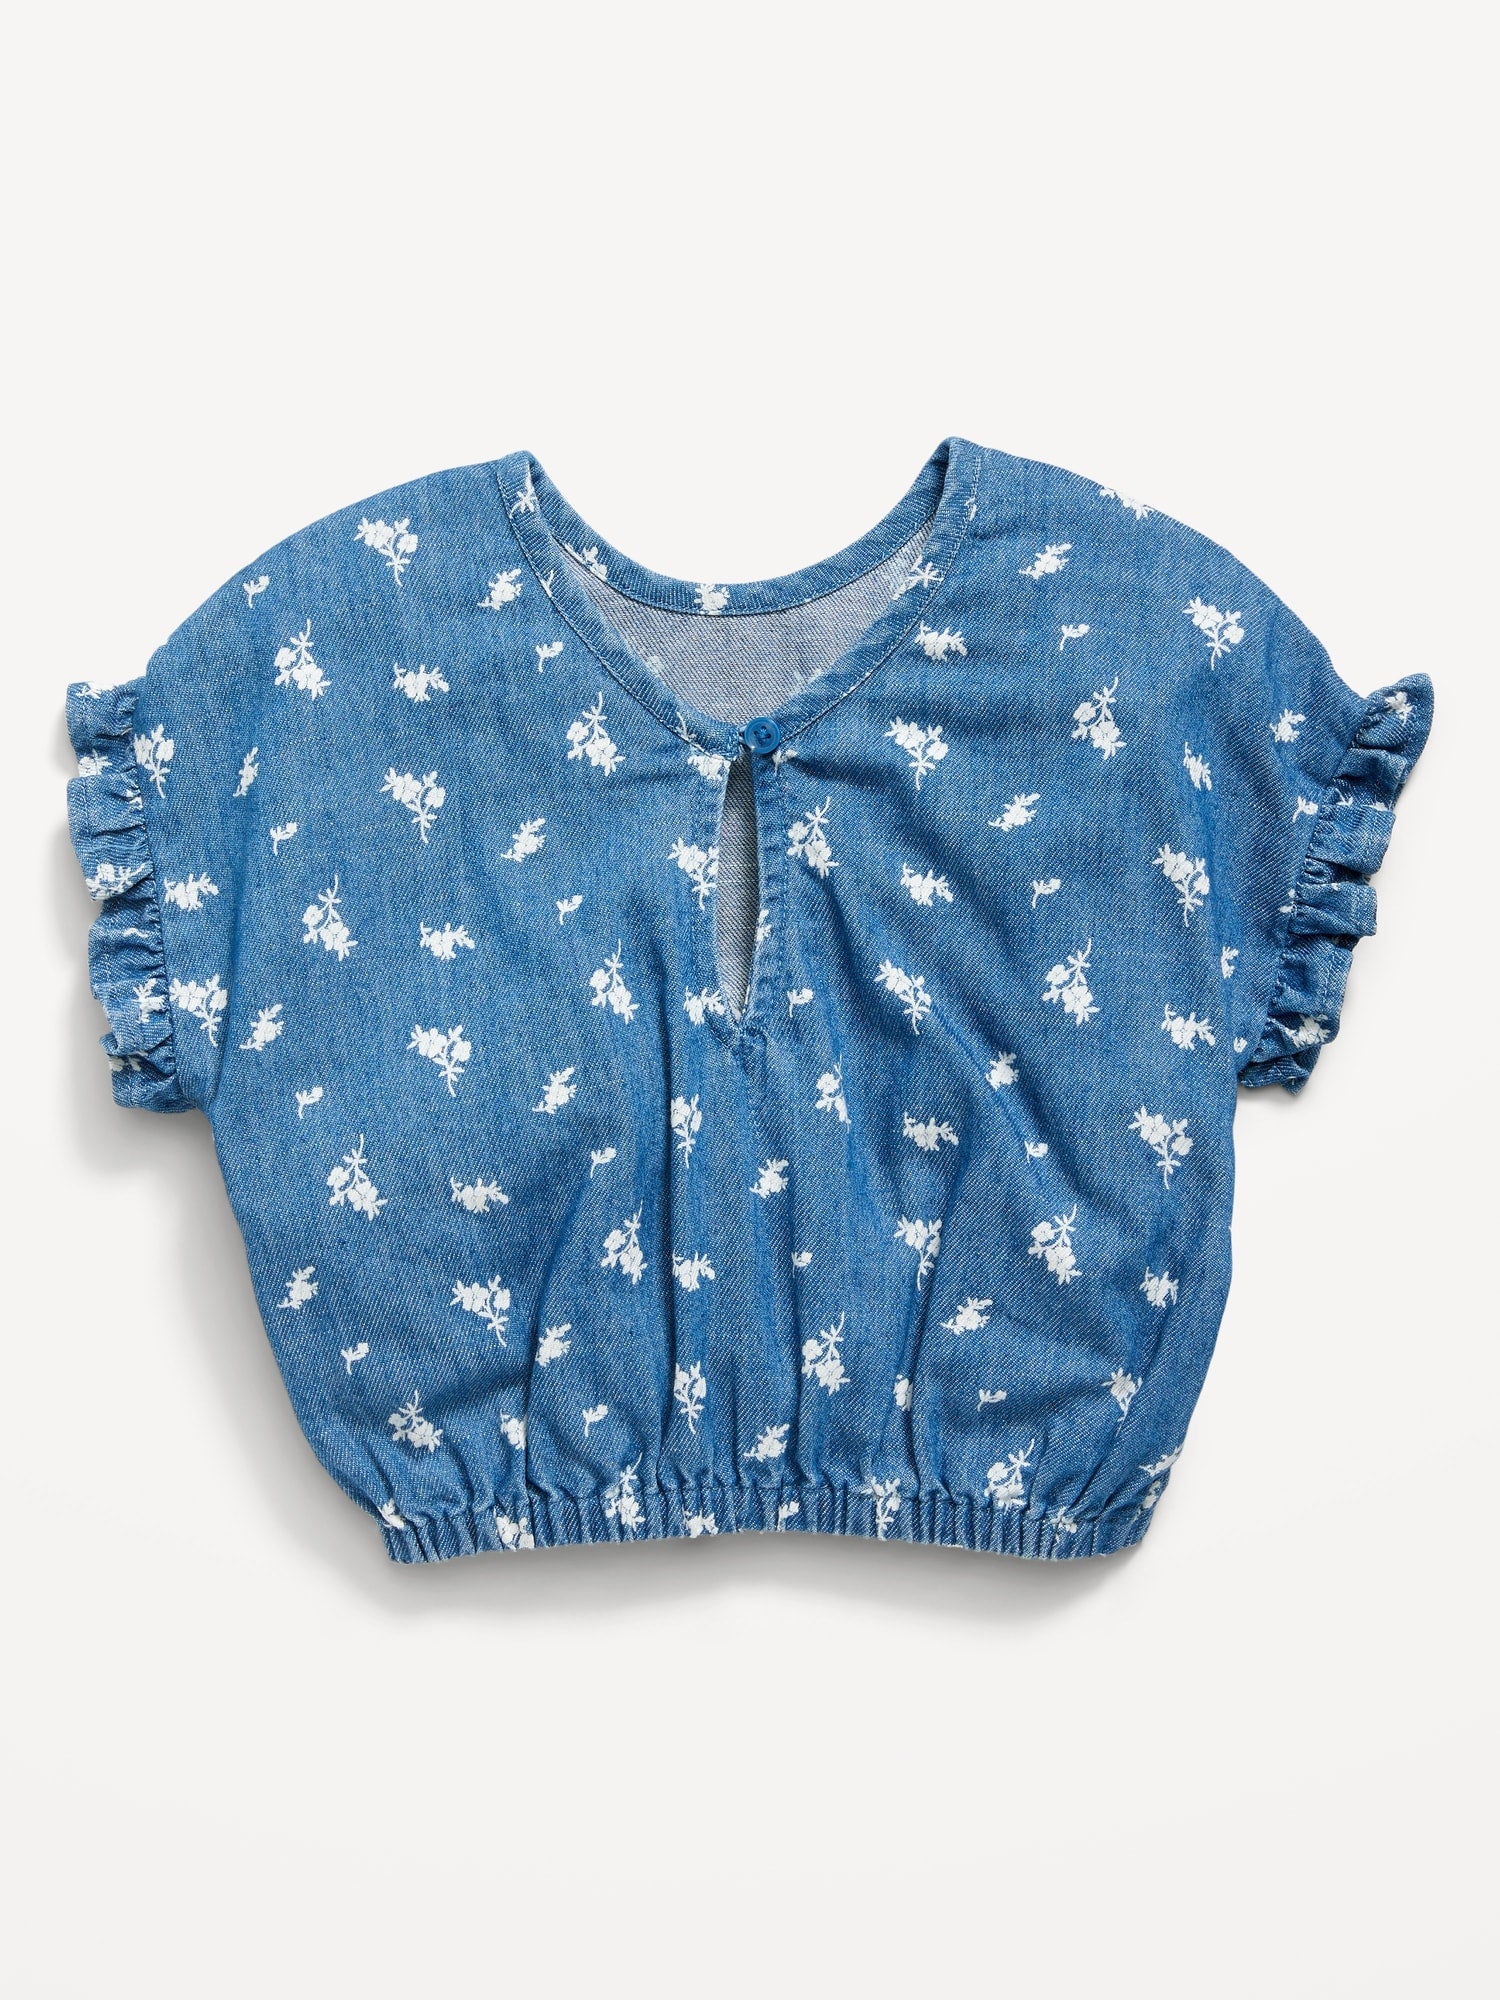 Chambray Blue Floral